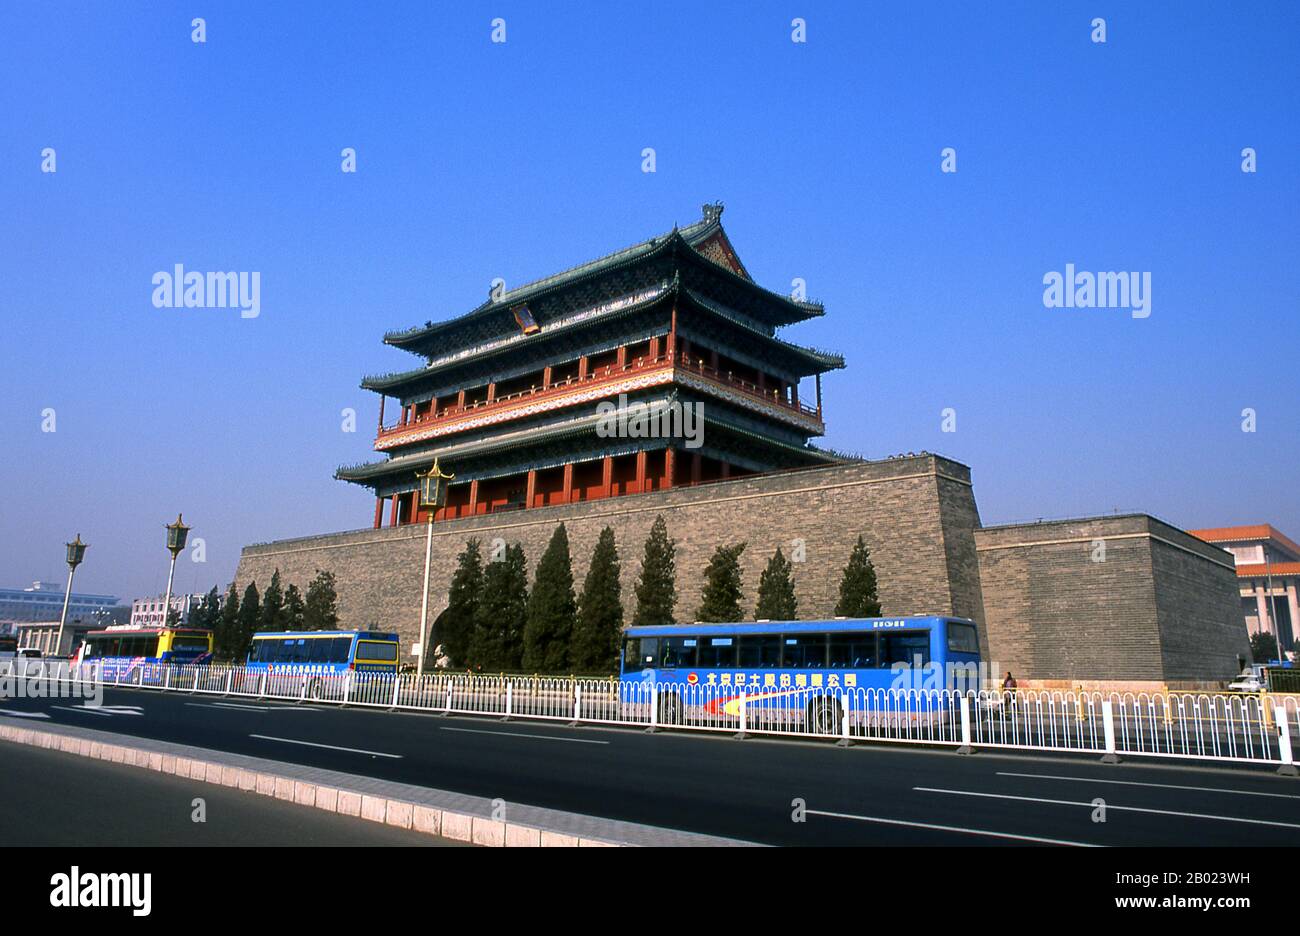 Zhengyangmen was first built in 1419 during the Ming Dynasty and once consisted of the gatehouse proper and an archery tower, which were connected by side walls and together with side gates, formed a large barbican. The gate guarded the direct entry into the imperial city.  During the Boxer Rebellion of 1900, the gate sustained considerable damage when the Eight-Nation Alliance invaded the city. The gate complex was extensively reconstructed in 1914. The Barbican side gates were torn down in 1915.  After the Communist victory in 1949, the Zhengyangmen gatehouse was occupied by the Beijing garr Stock Photo